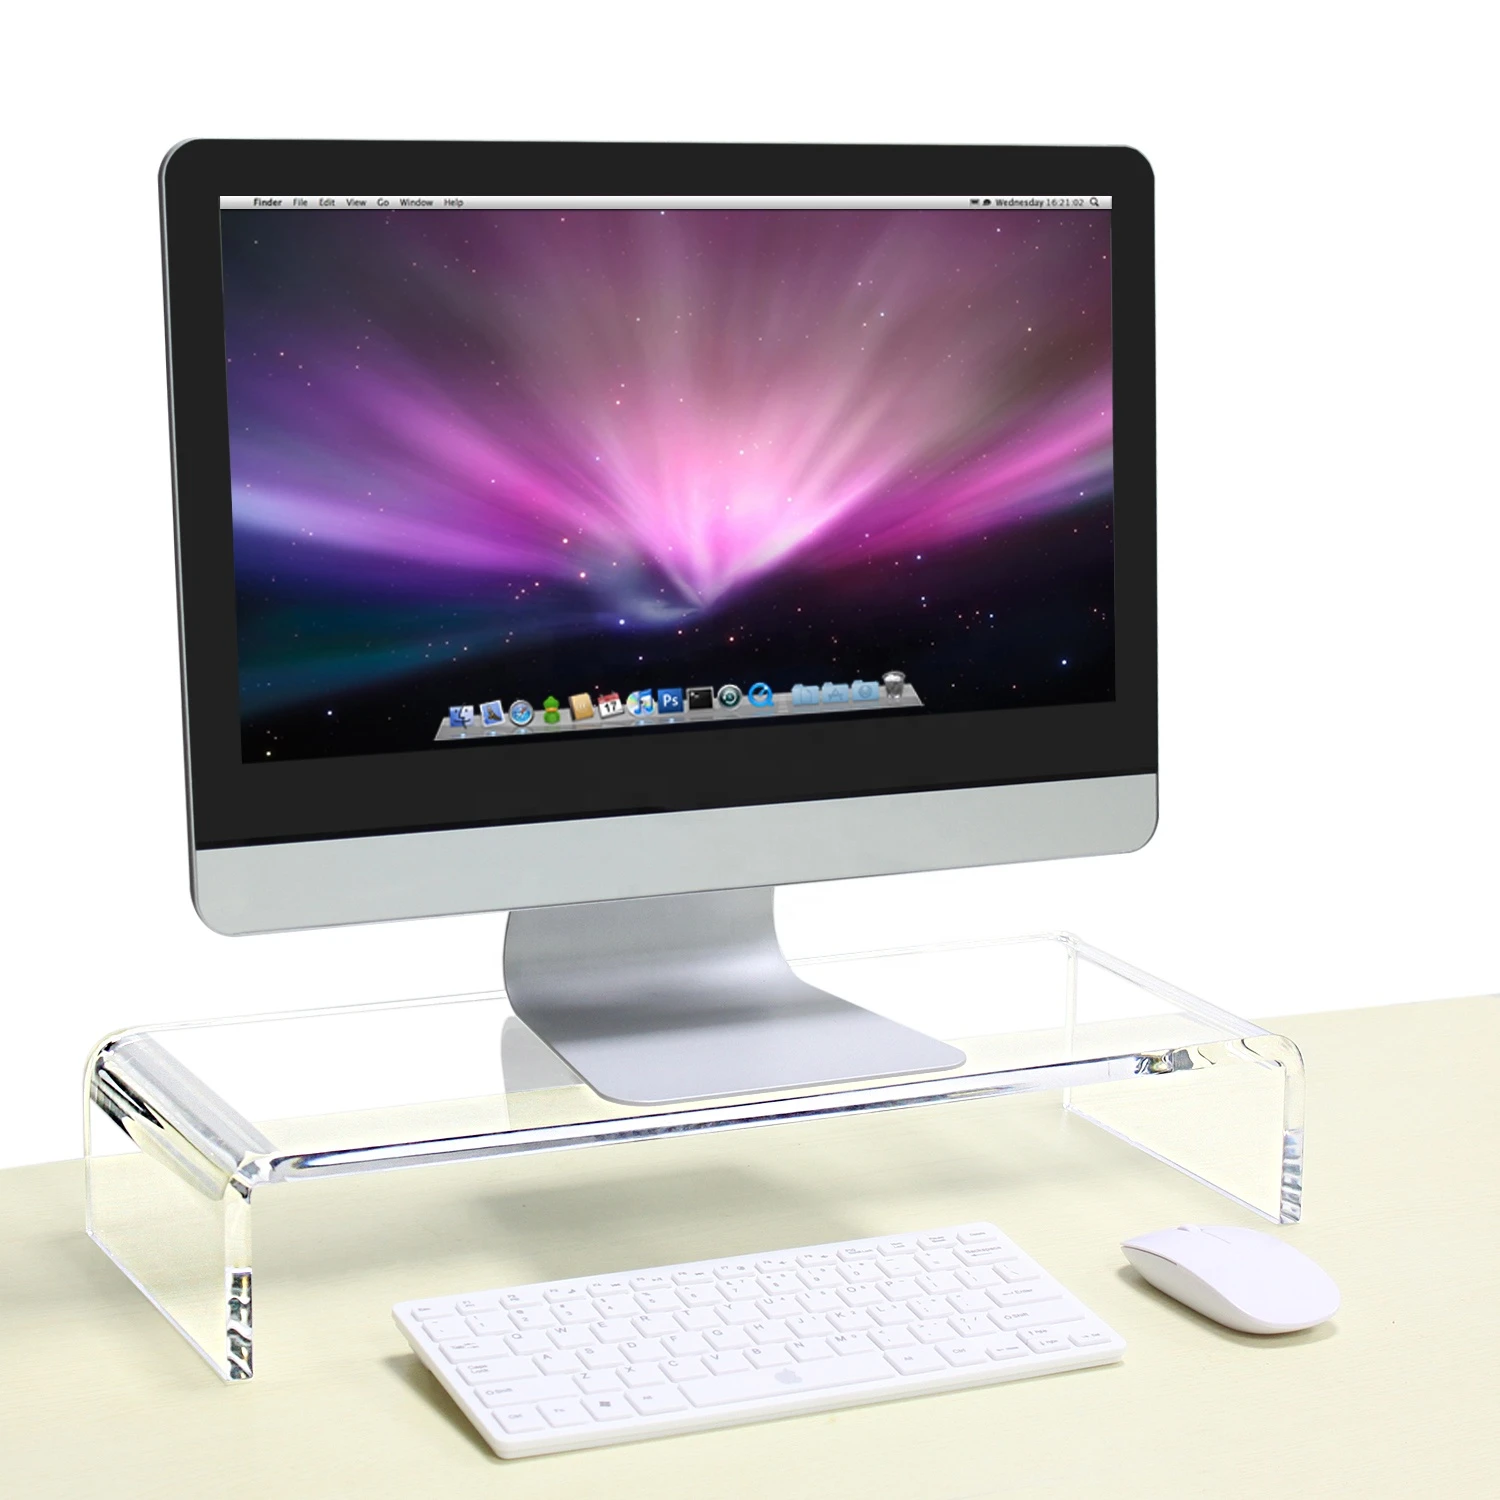 2020 Clear Ergonomic Acrylic Laptop Stand Desk Notebook PC Monitor Stand Computer Screen Holder